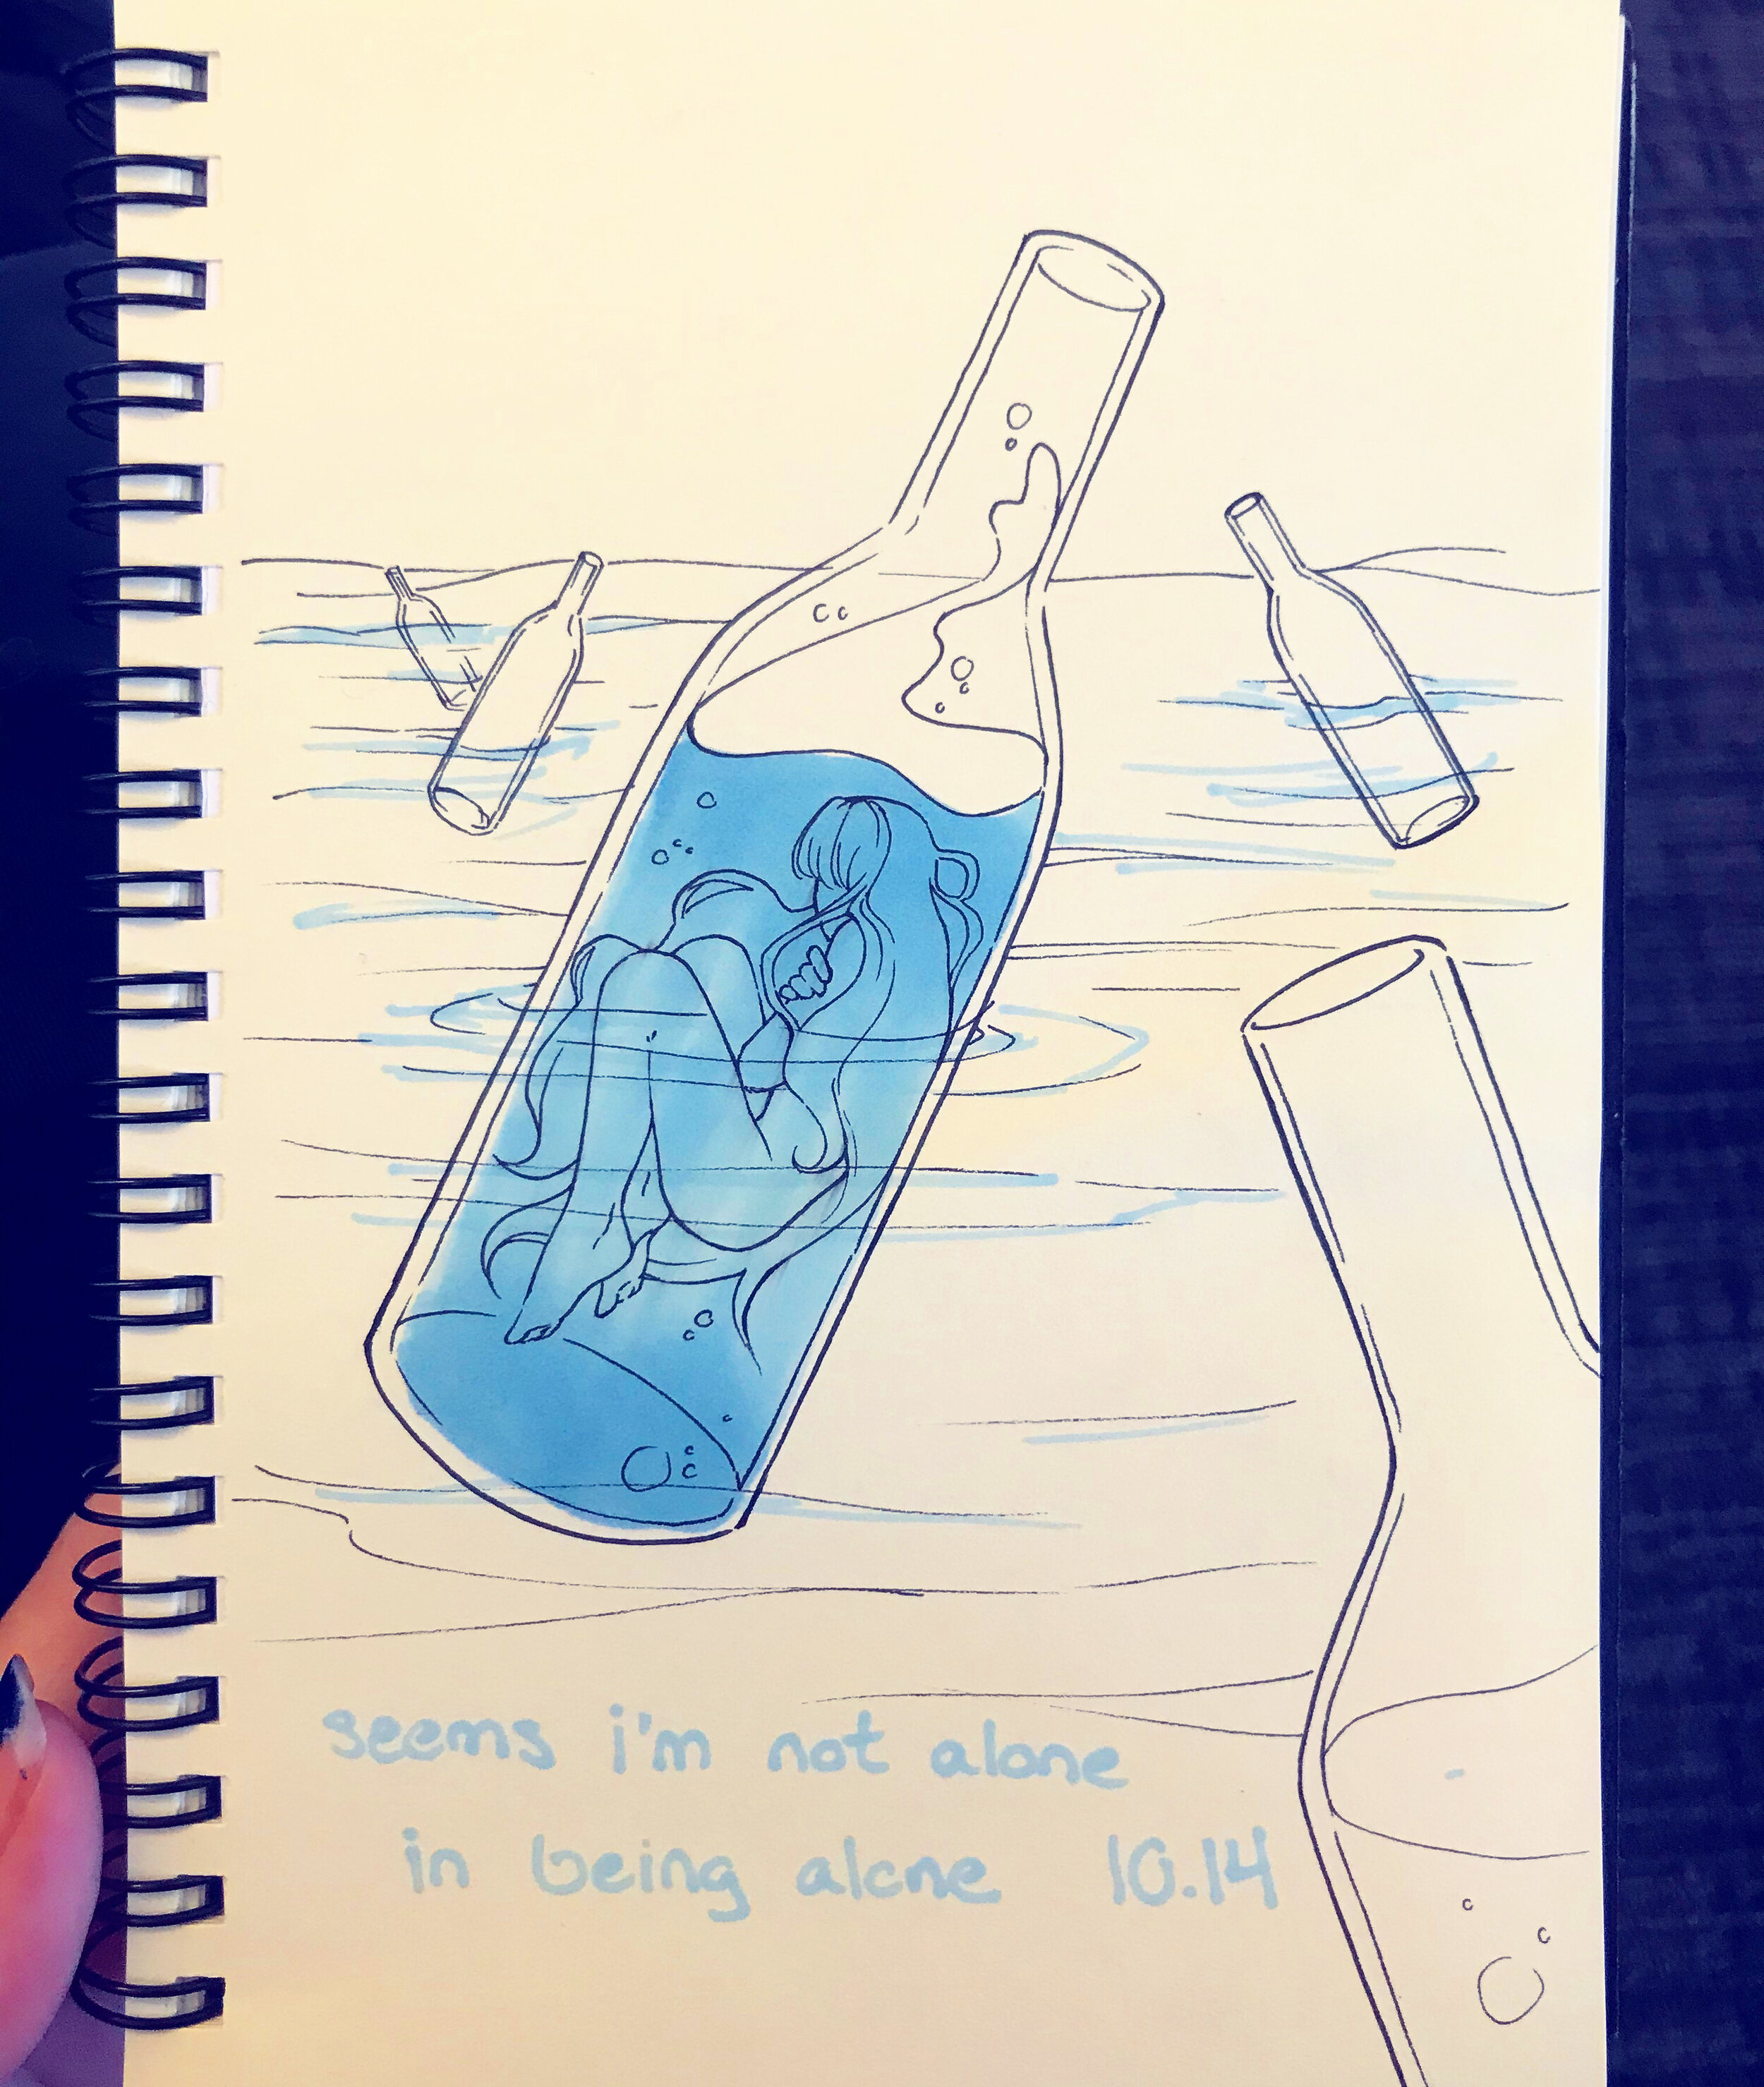 Day 14: Message In A Bottle (The Police)